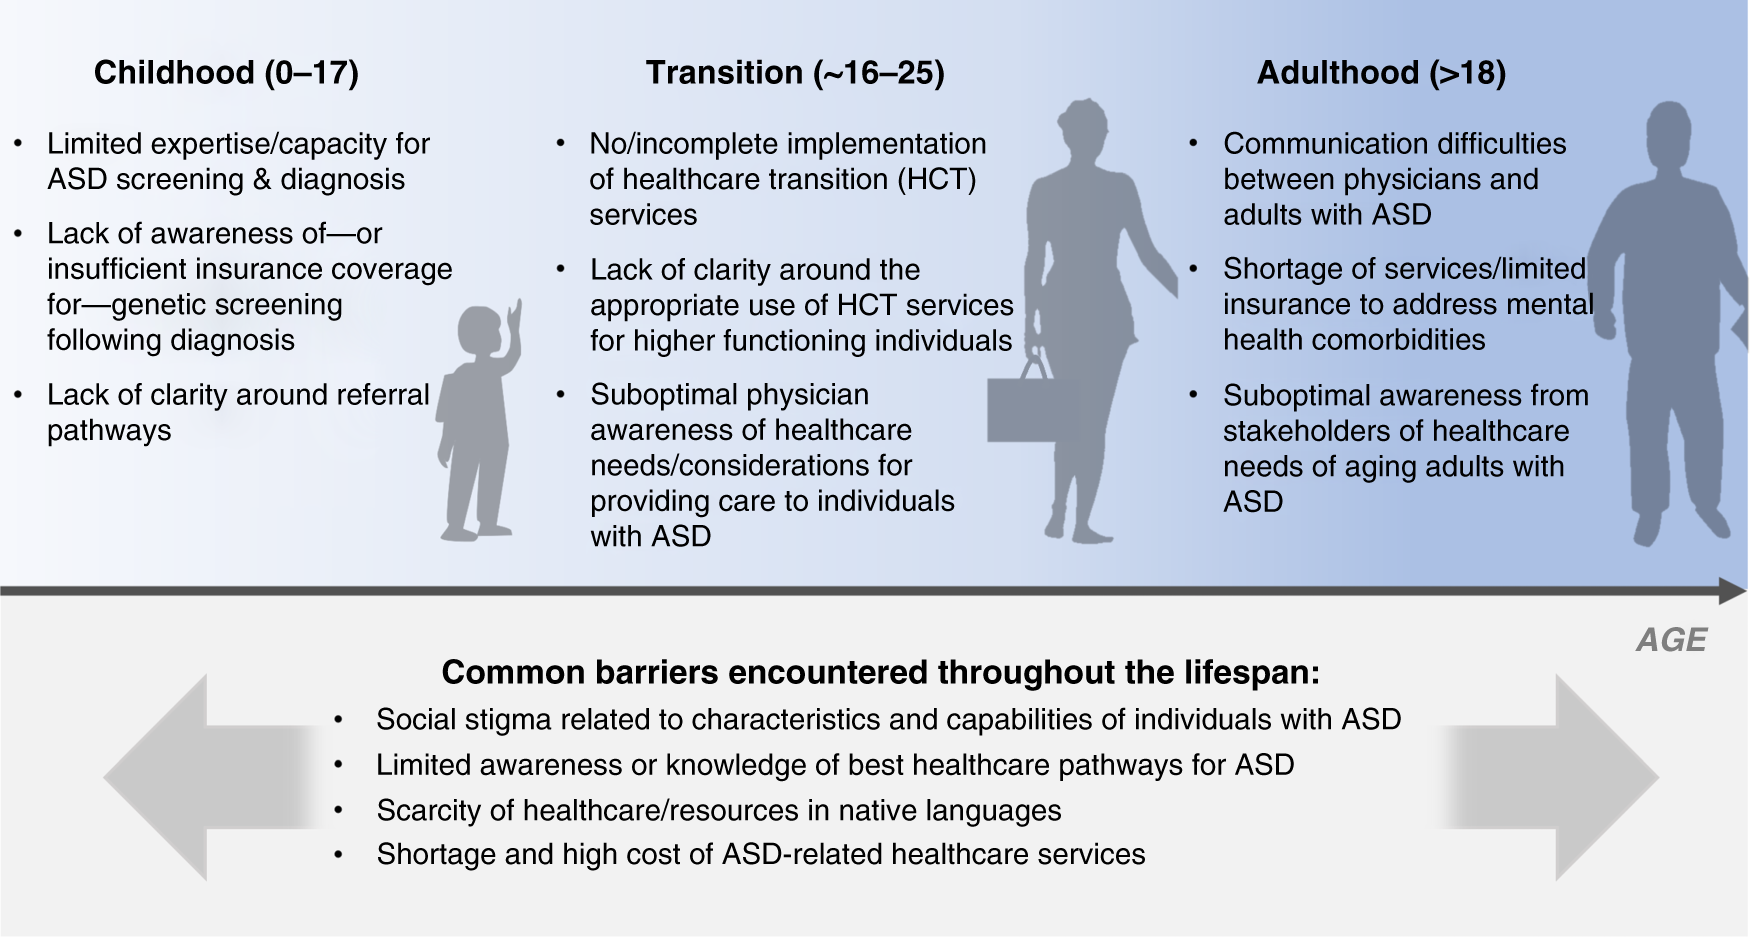 Tackling healthcare access barriers for individuals with autism from diagnosis to adulthood Pediatric Research image